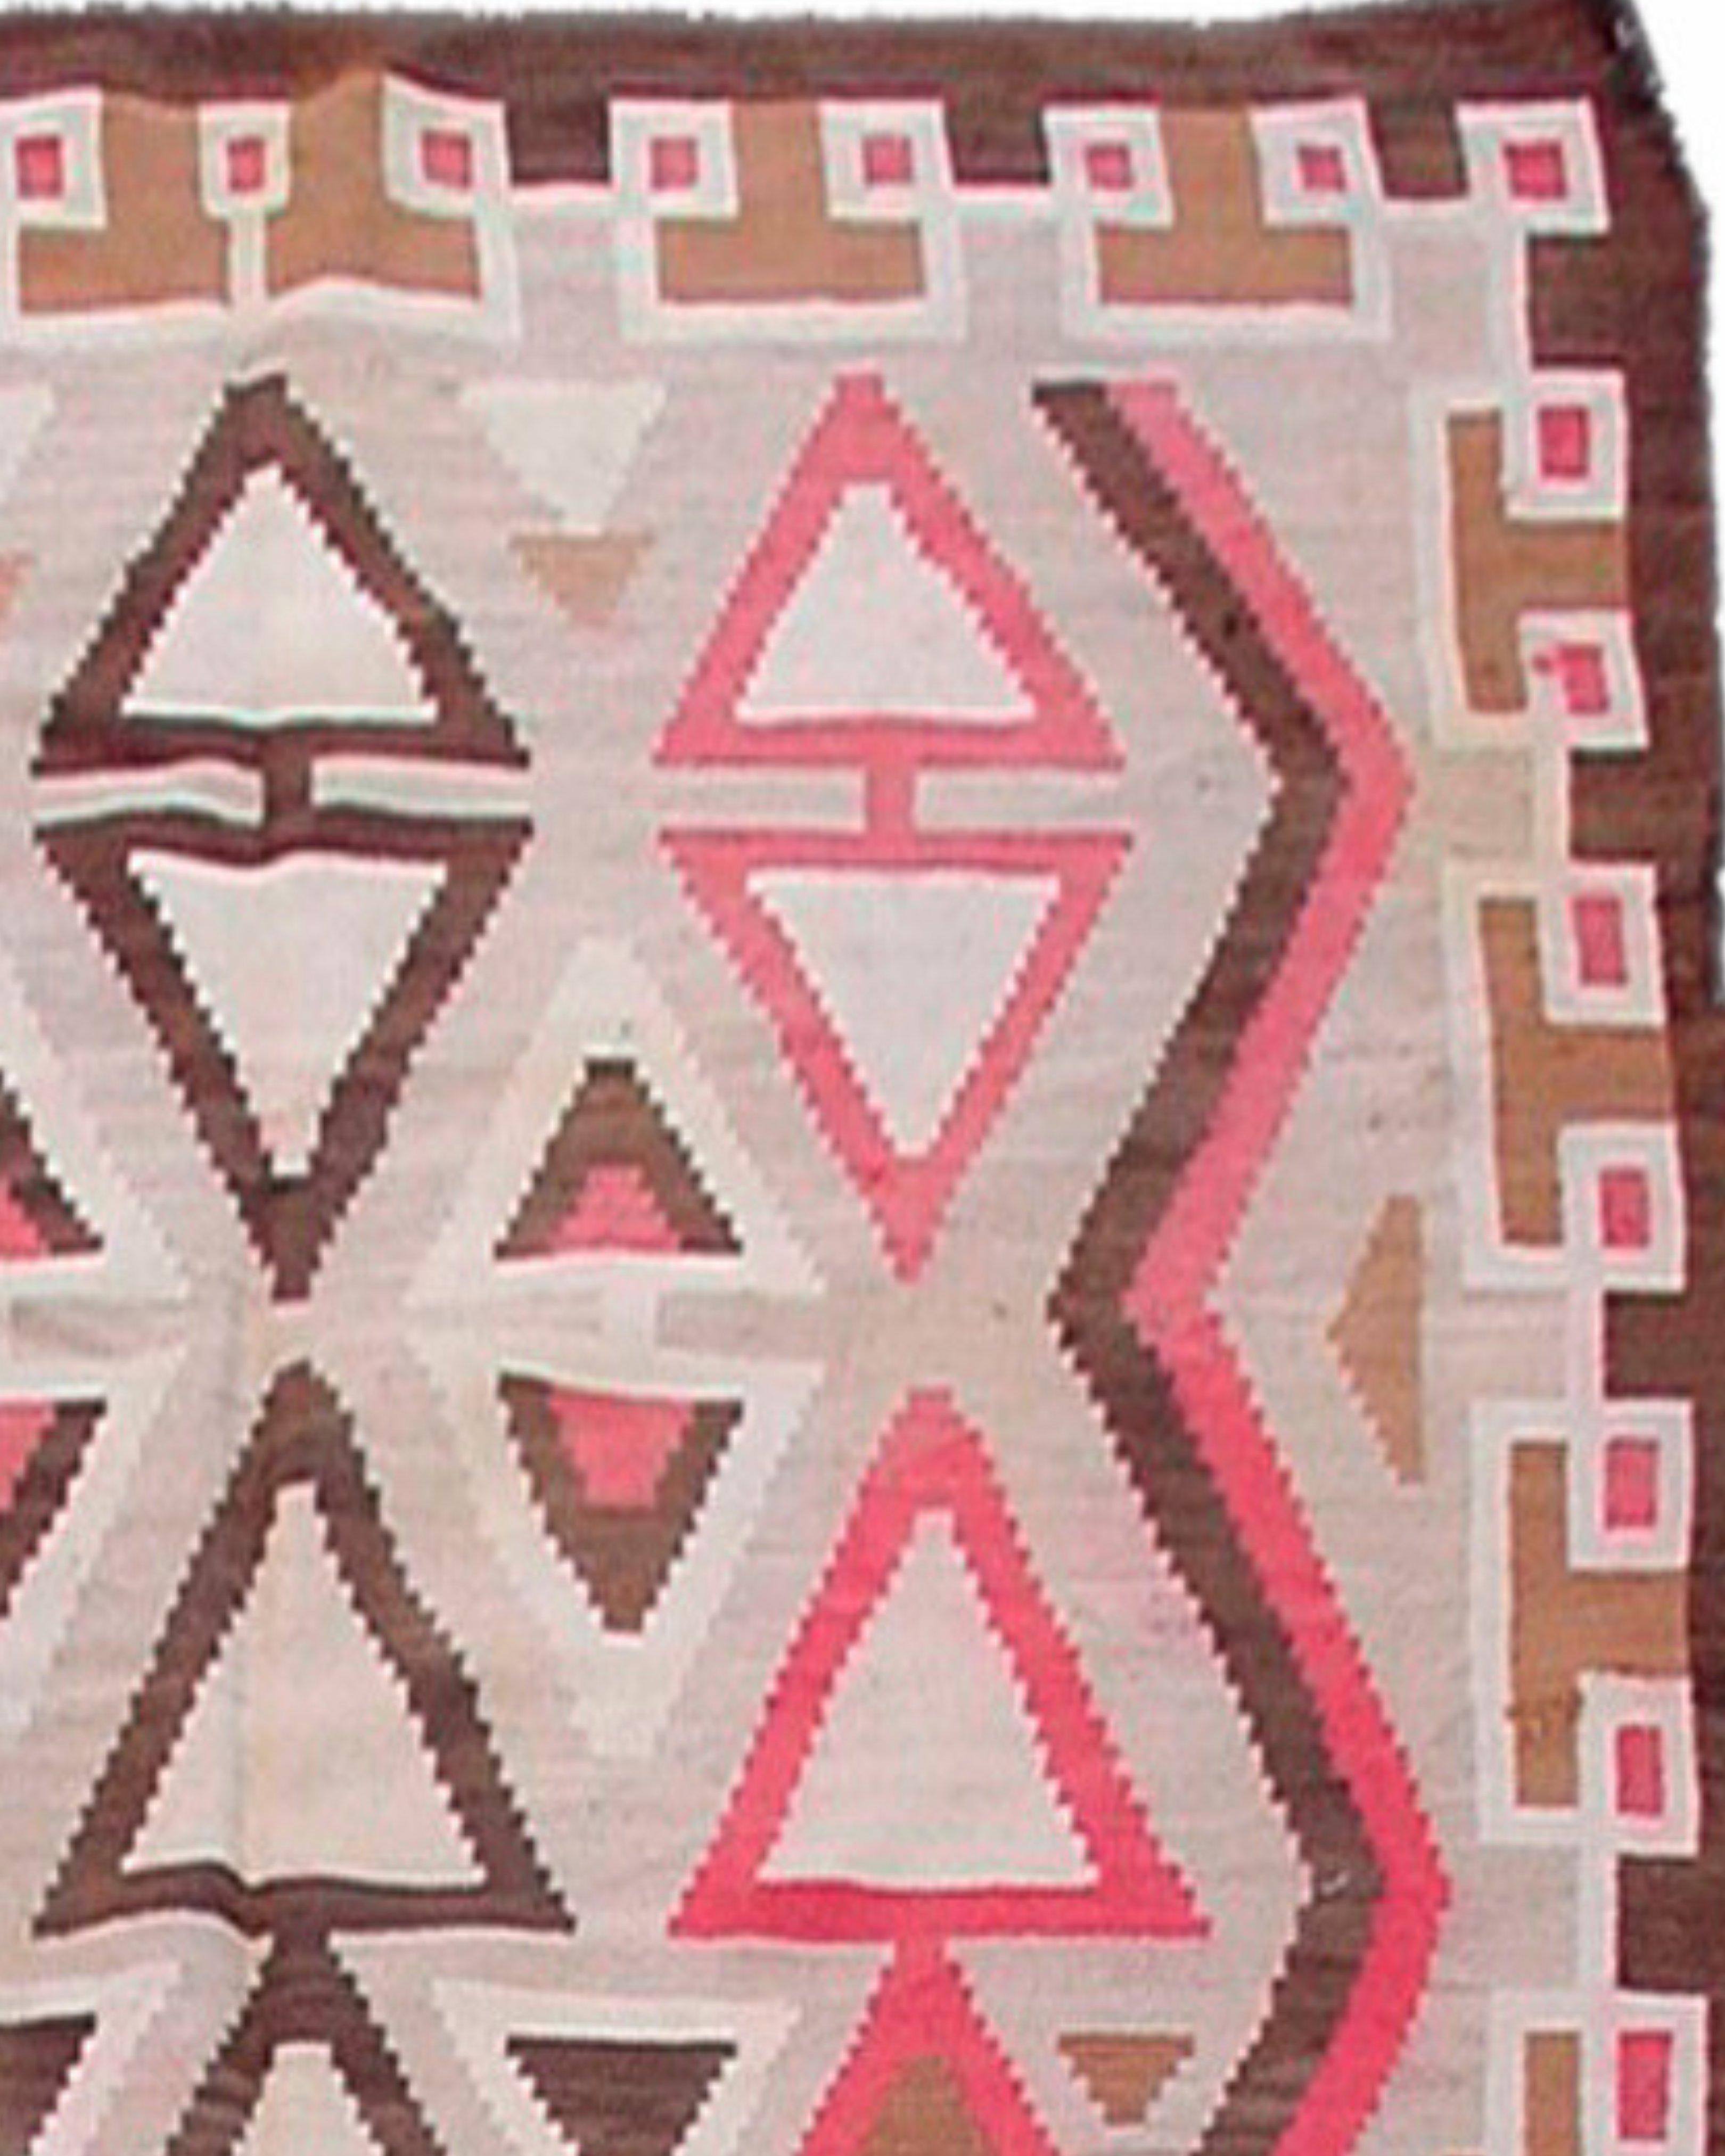 Antique Handwoven Navajo Rug, Early 20th Century

Additional Information:
Dimensions: 6'3